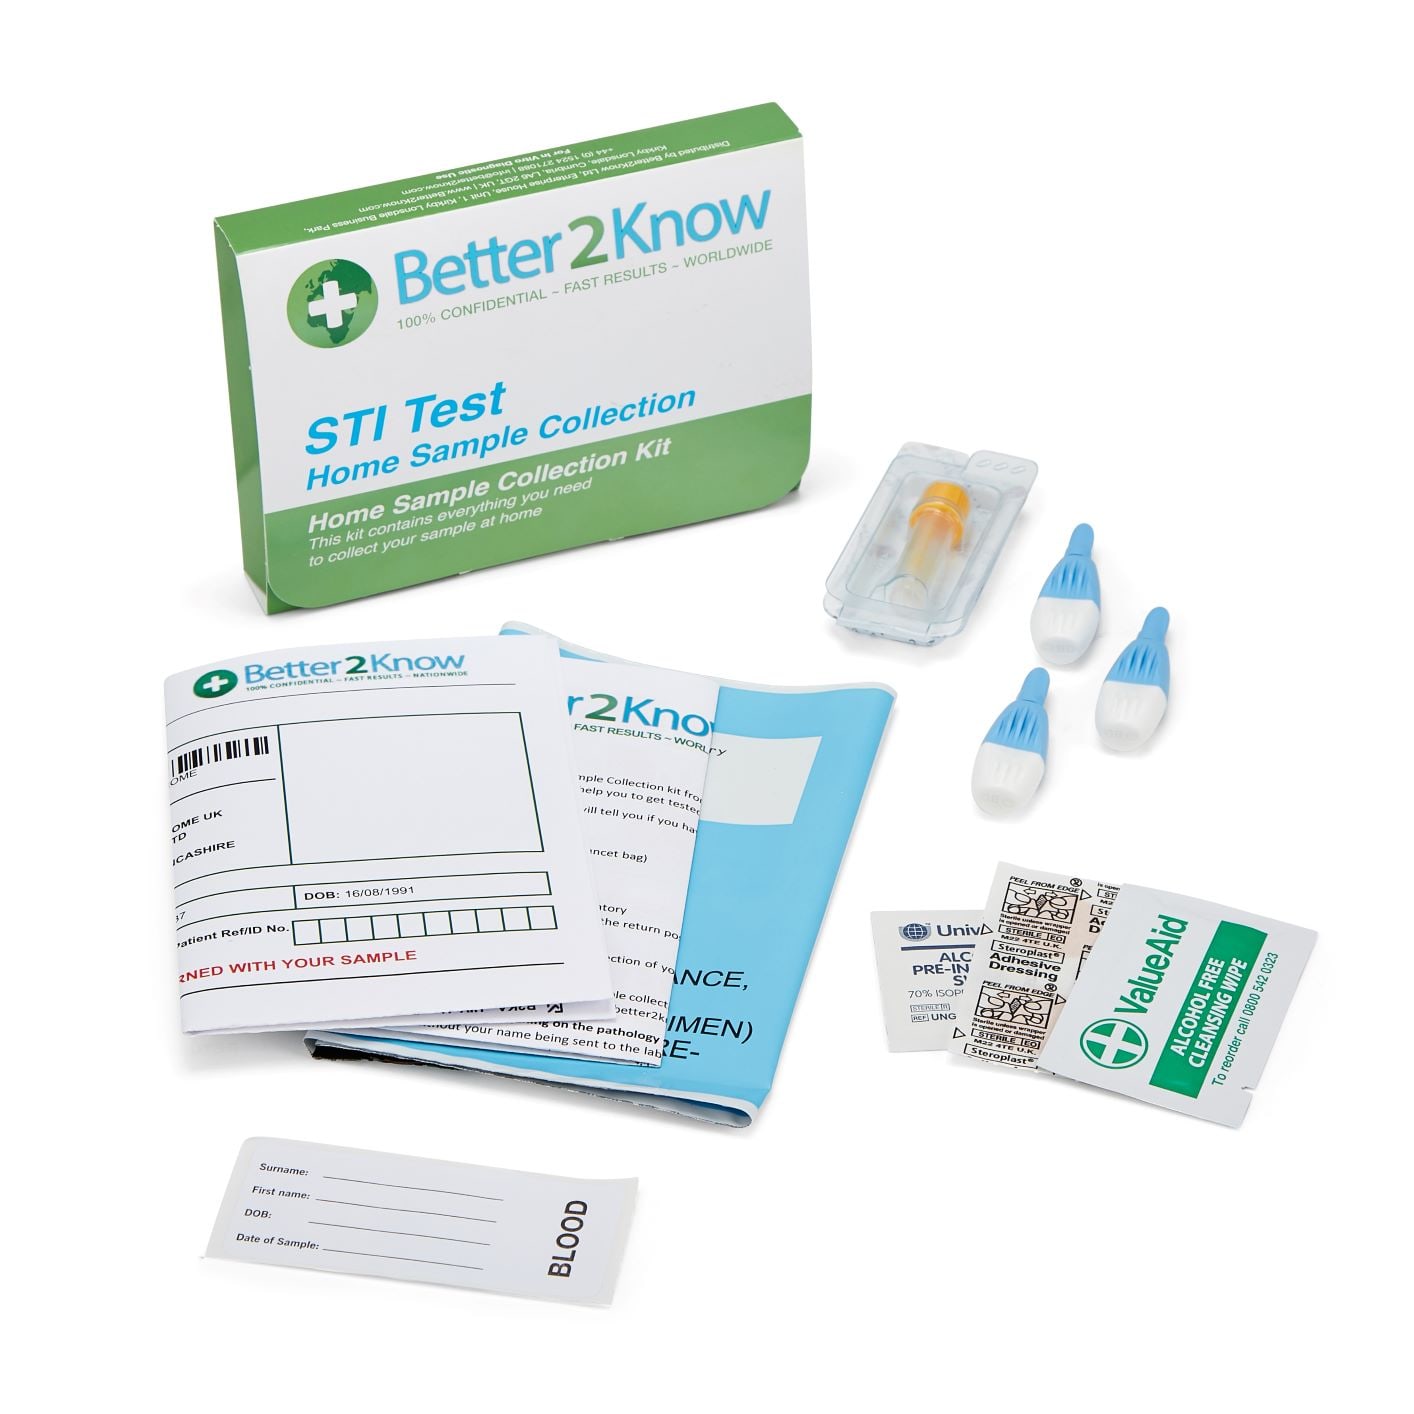 Better2Know 4th Generation HIV test.